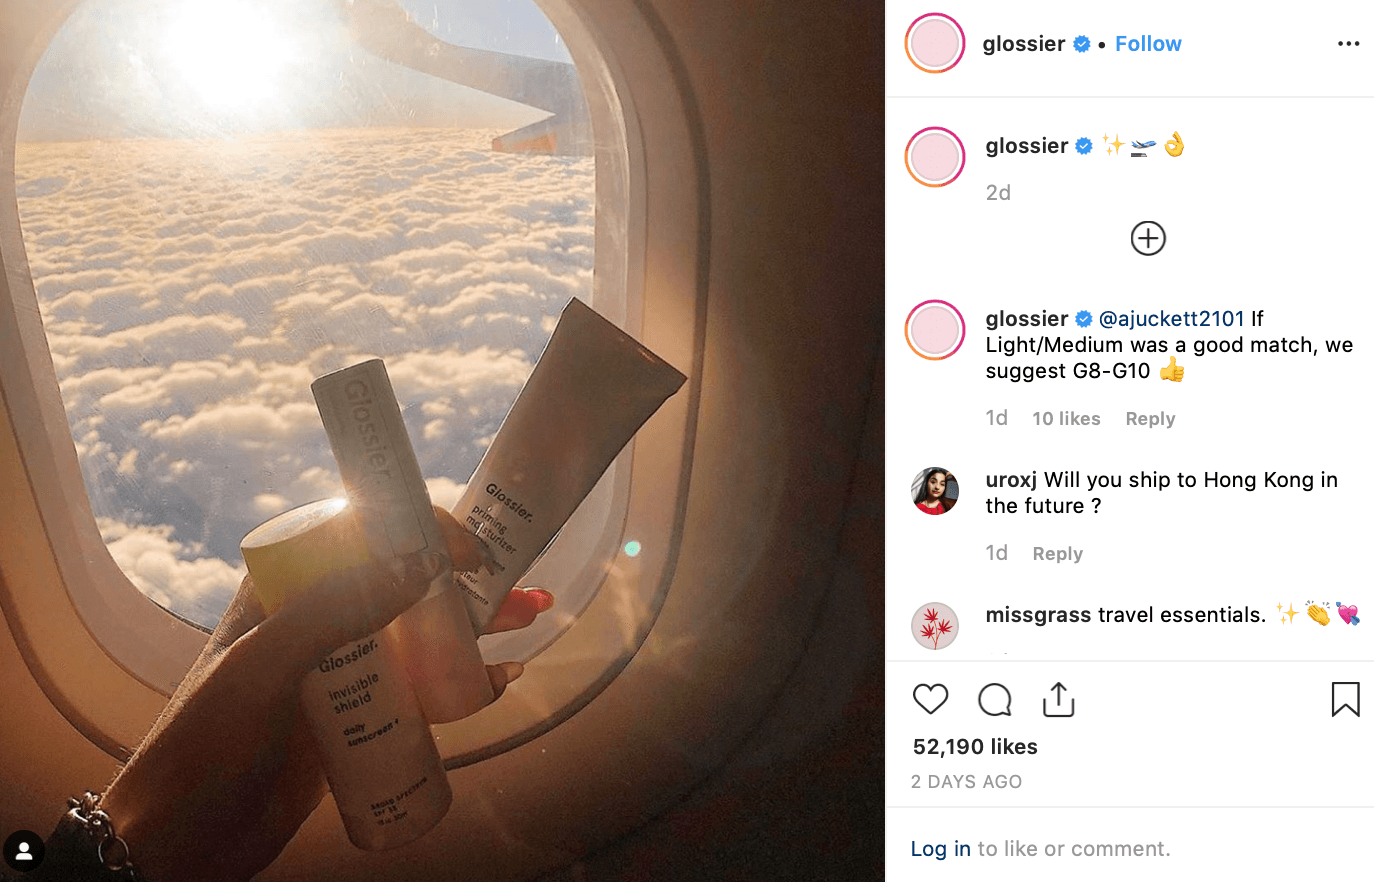 Example of social media marketing from the brand Glossier